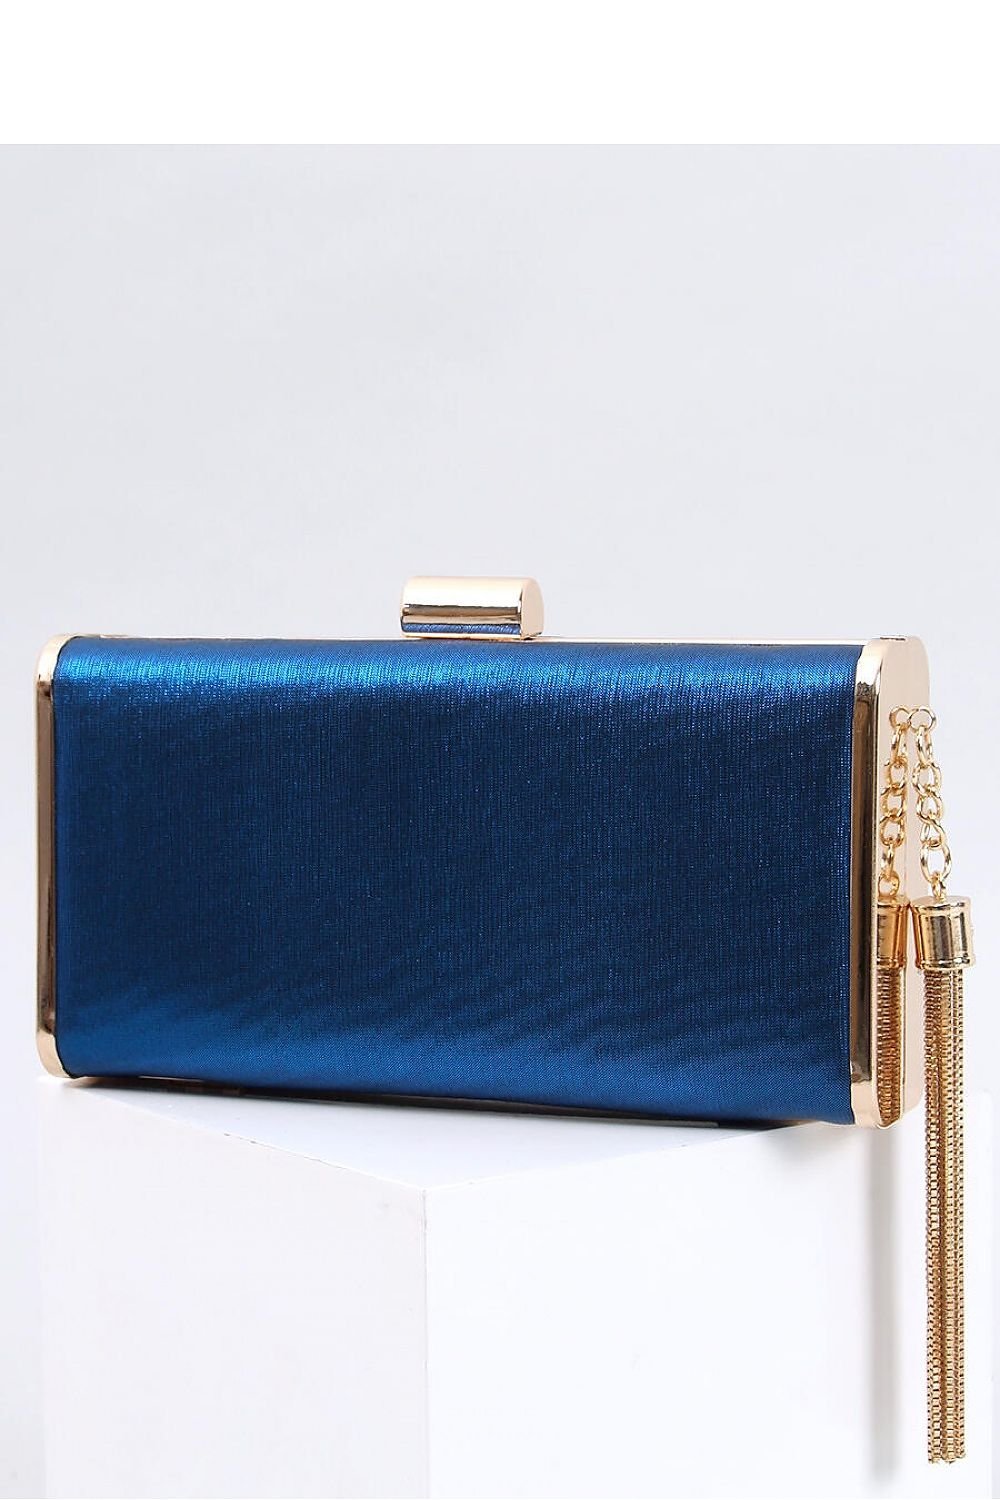 Envelope clutch bag - M&H FashionEnvelope clutch bagM&H FashionM&H Fashion189616_1103874one-size-fits-allEnvelope clutch bag InelloM&H FashionM&H FashionVisitor clutch bag for women with a tassel. This unique model with an iridescent finish is sure to catch the eye.... The handbag can be carried in hand or on a delicEnvelope clutch bag